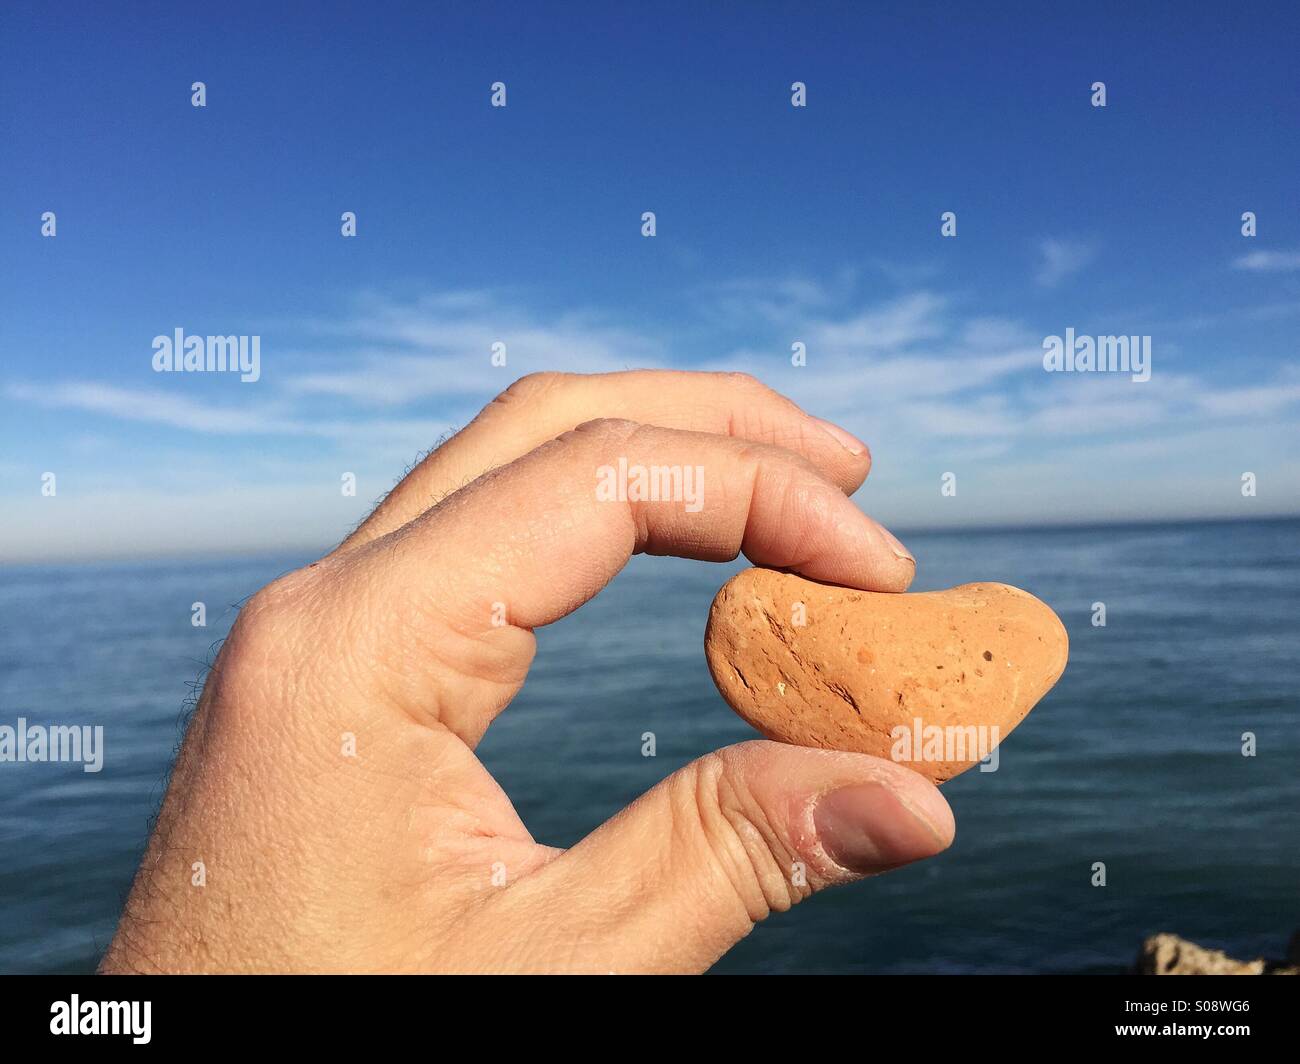 Love message conceptual image with a stone heart between fingers Stock Photo